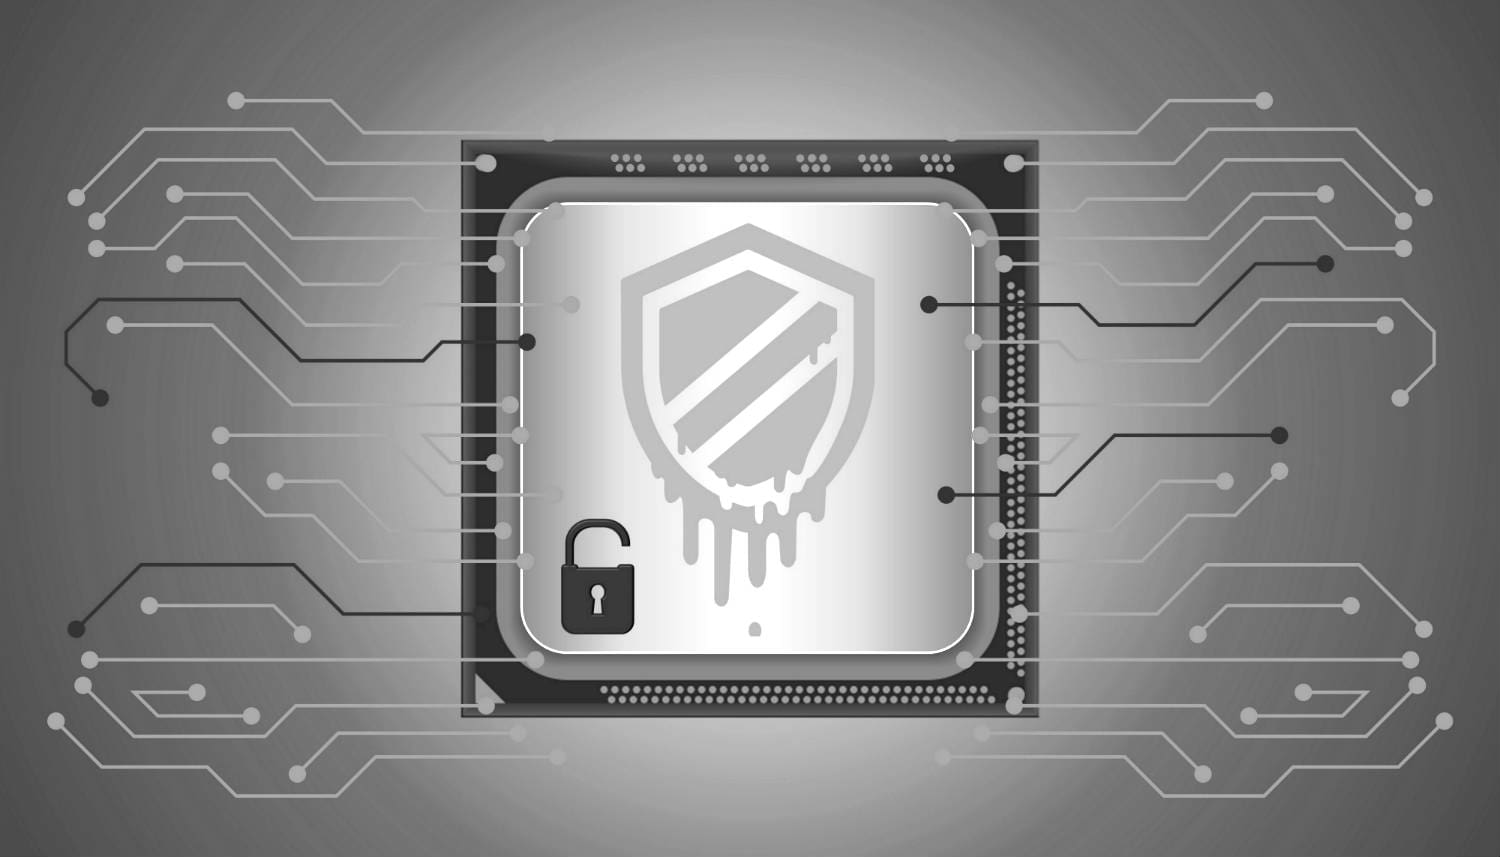 abstract graphic of a CPU with an unlocked padlock icon overlayed